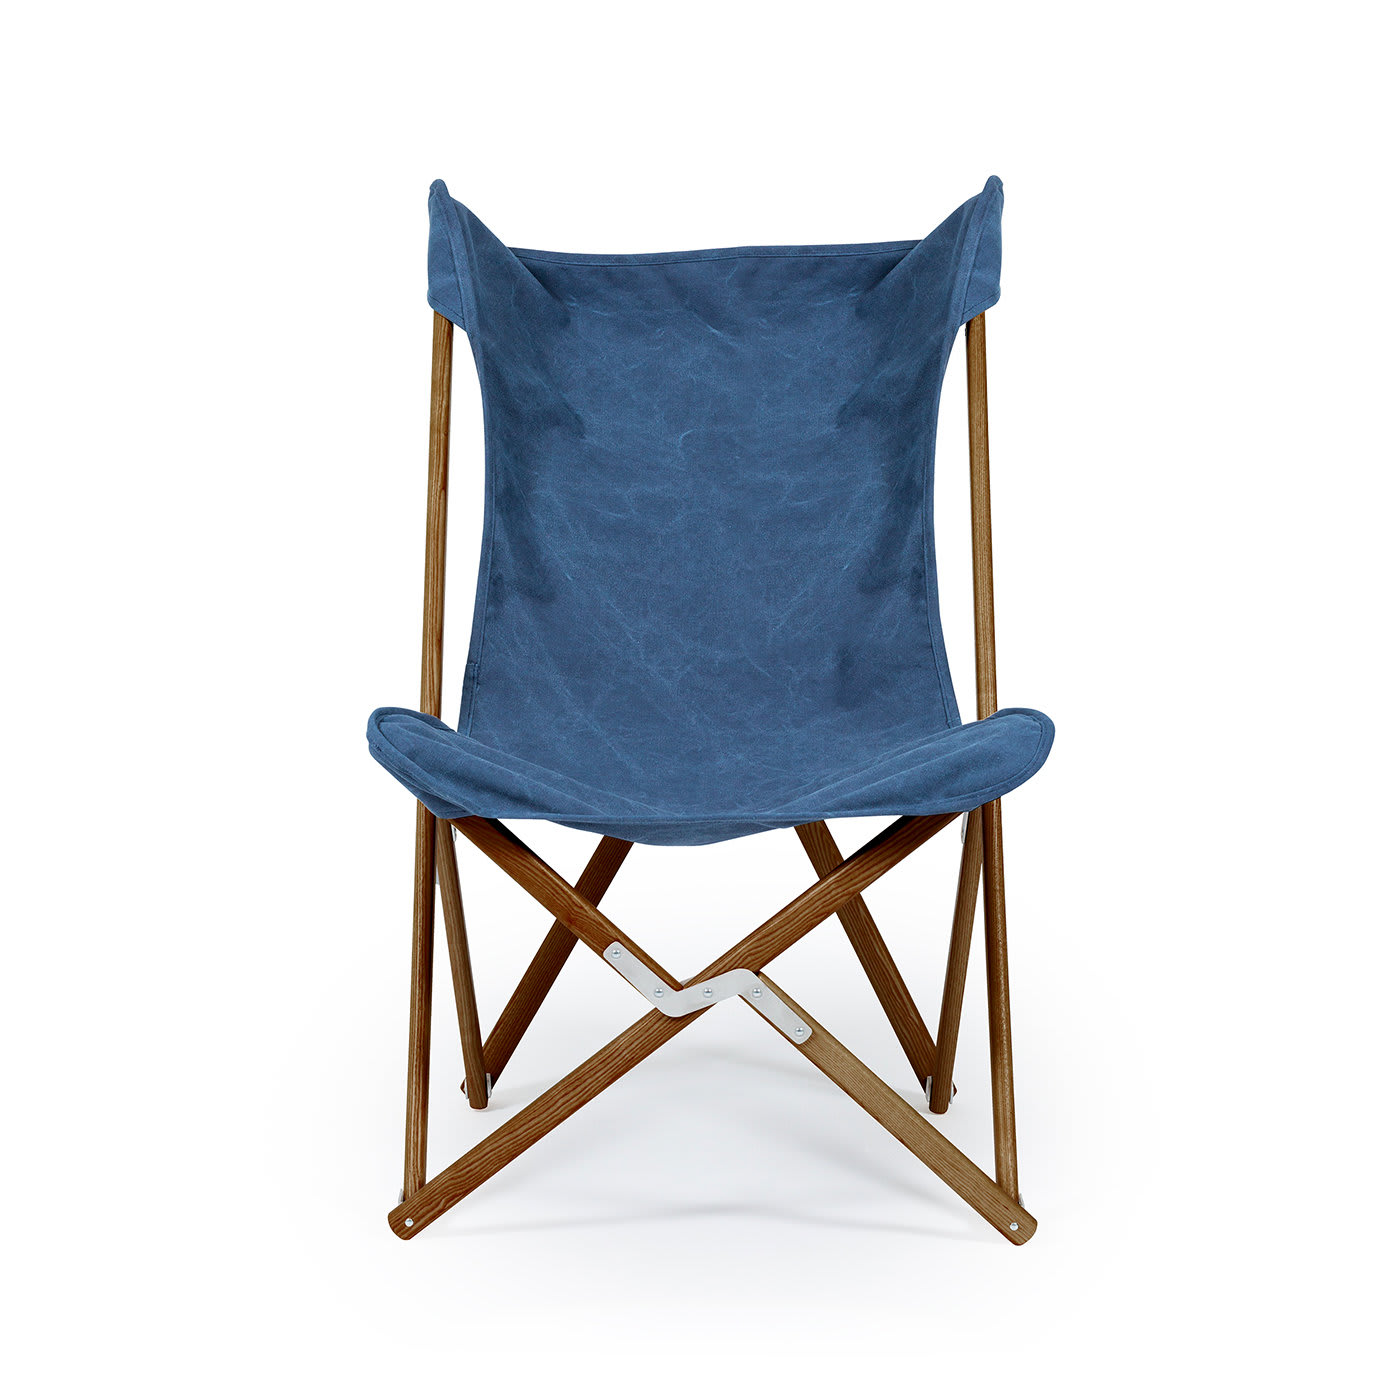 Tripolina Armchair in Blue Jeans - Telami